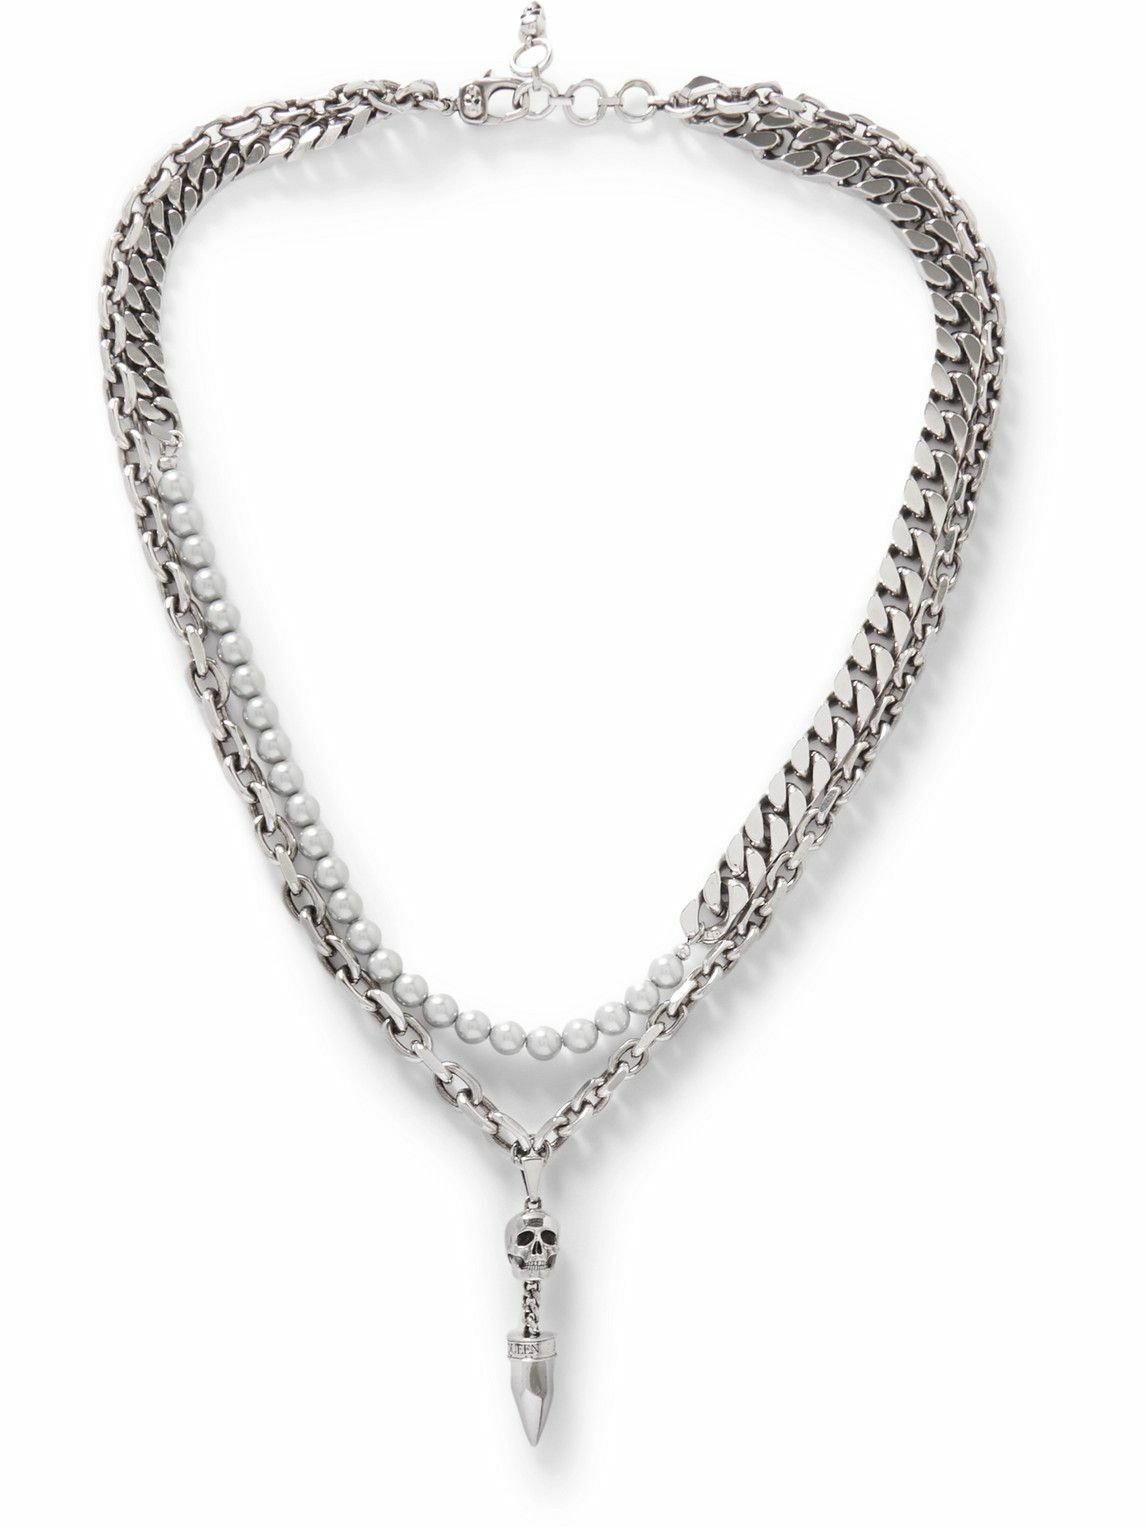 Photo: Alexander McQueen - Skull Silver-Tone and Faux Pearl Chain Necklace